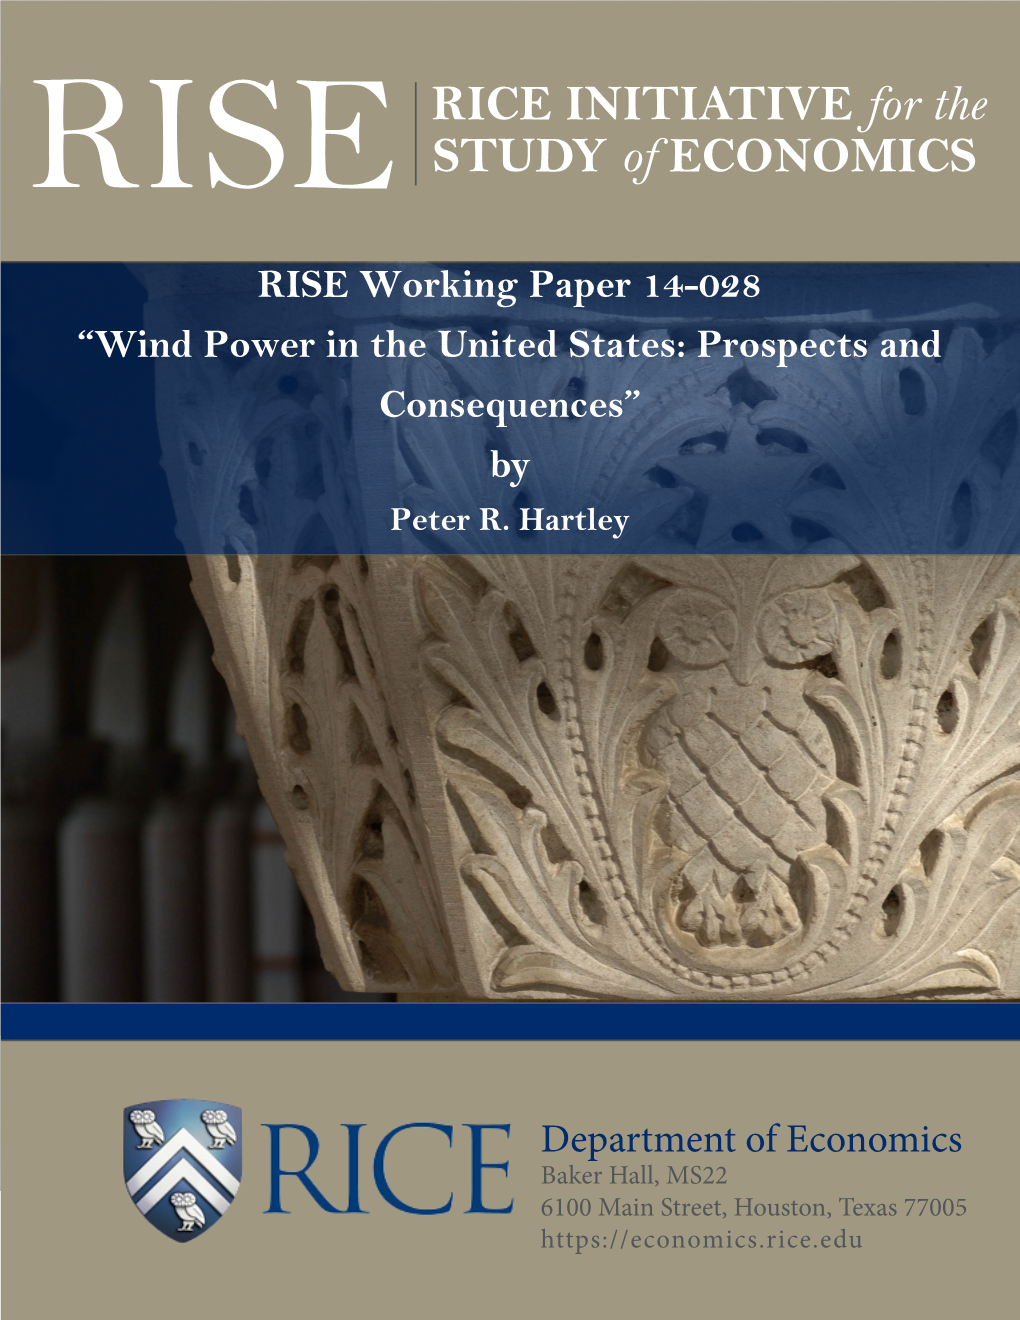 Wind Power in the United States: Prospects and Consequences” by Peter R